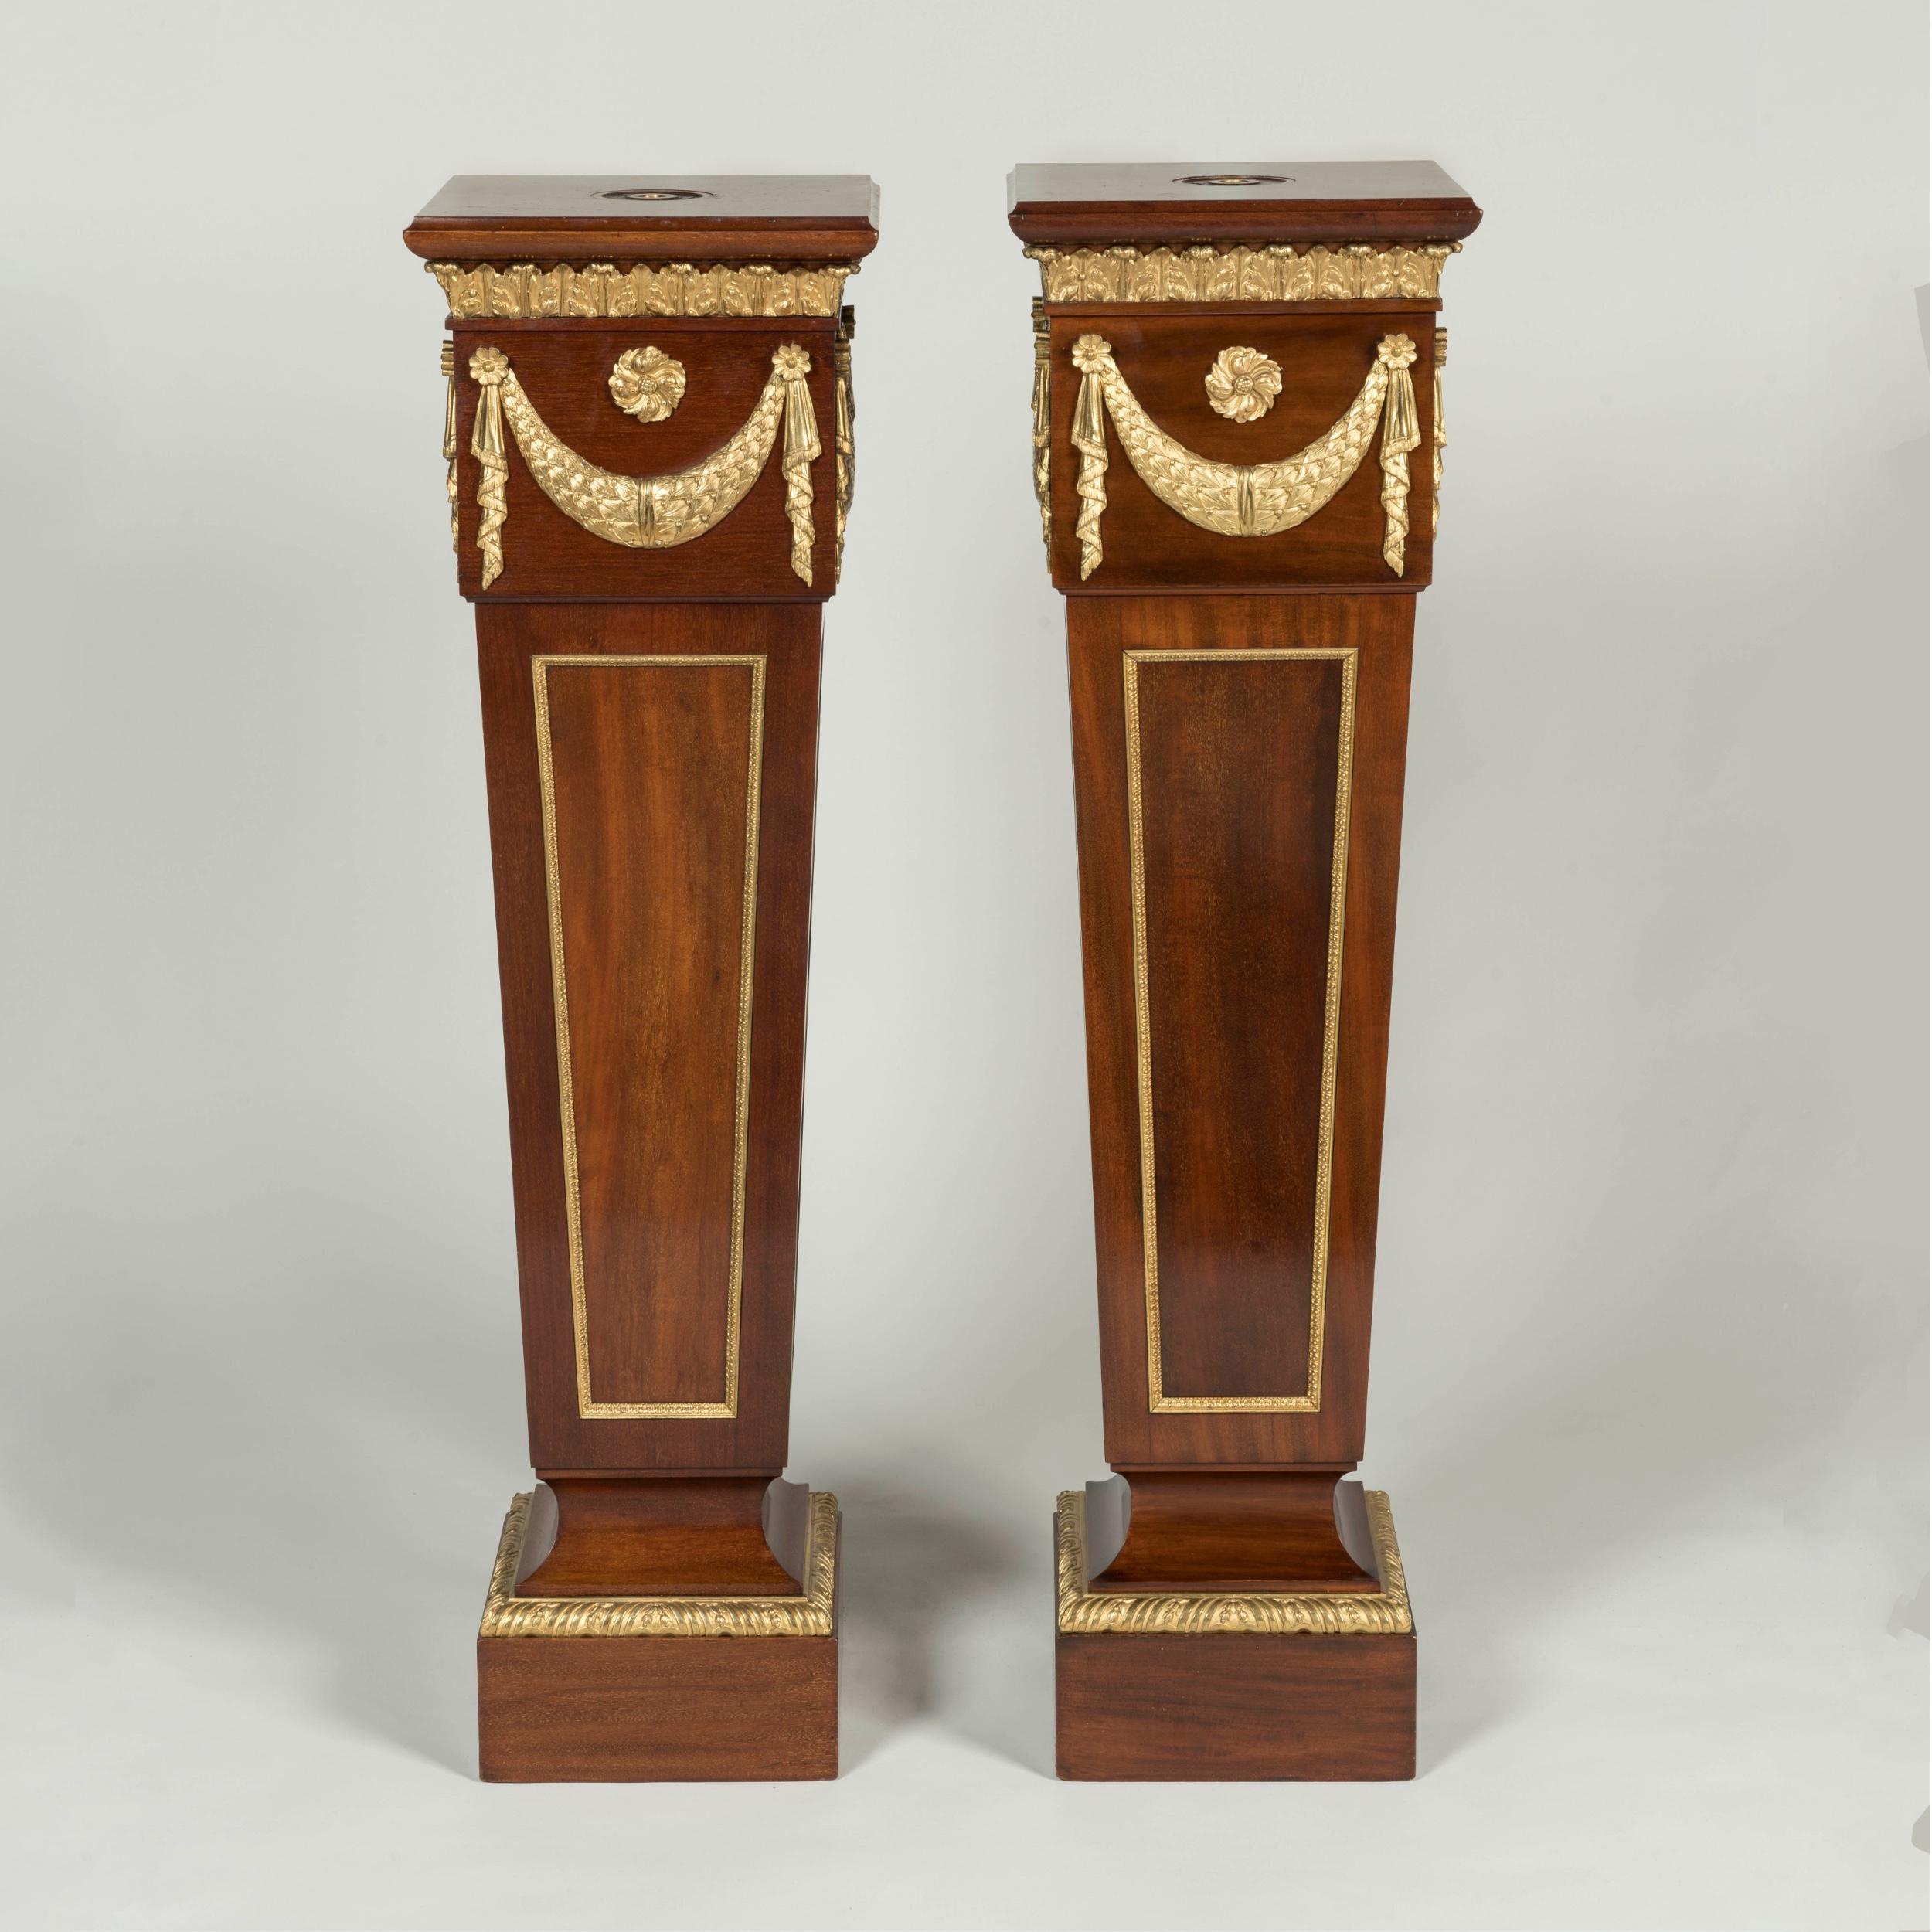 Neoclassical 19th Century Pair of English Ormolu-Mounted Mahogany Pedestals by Trollope For Sale